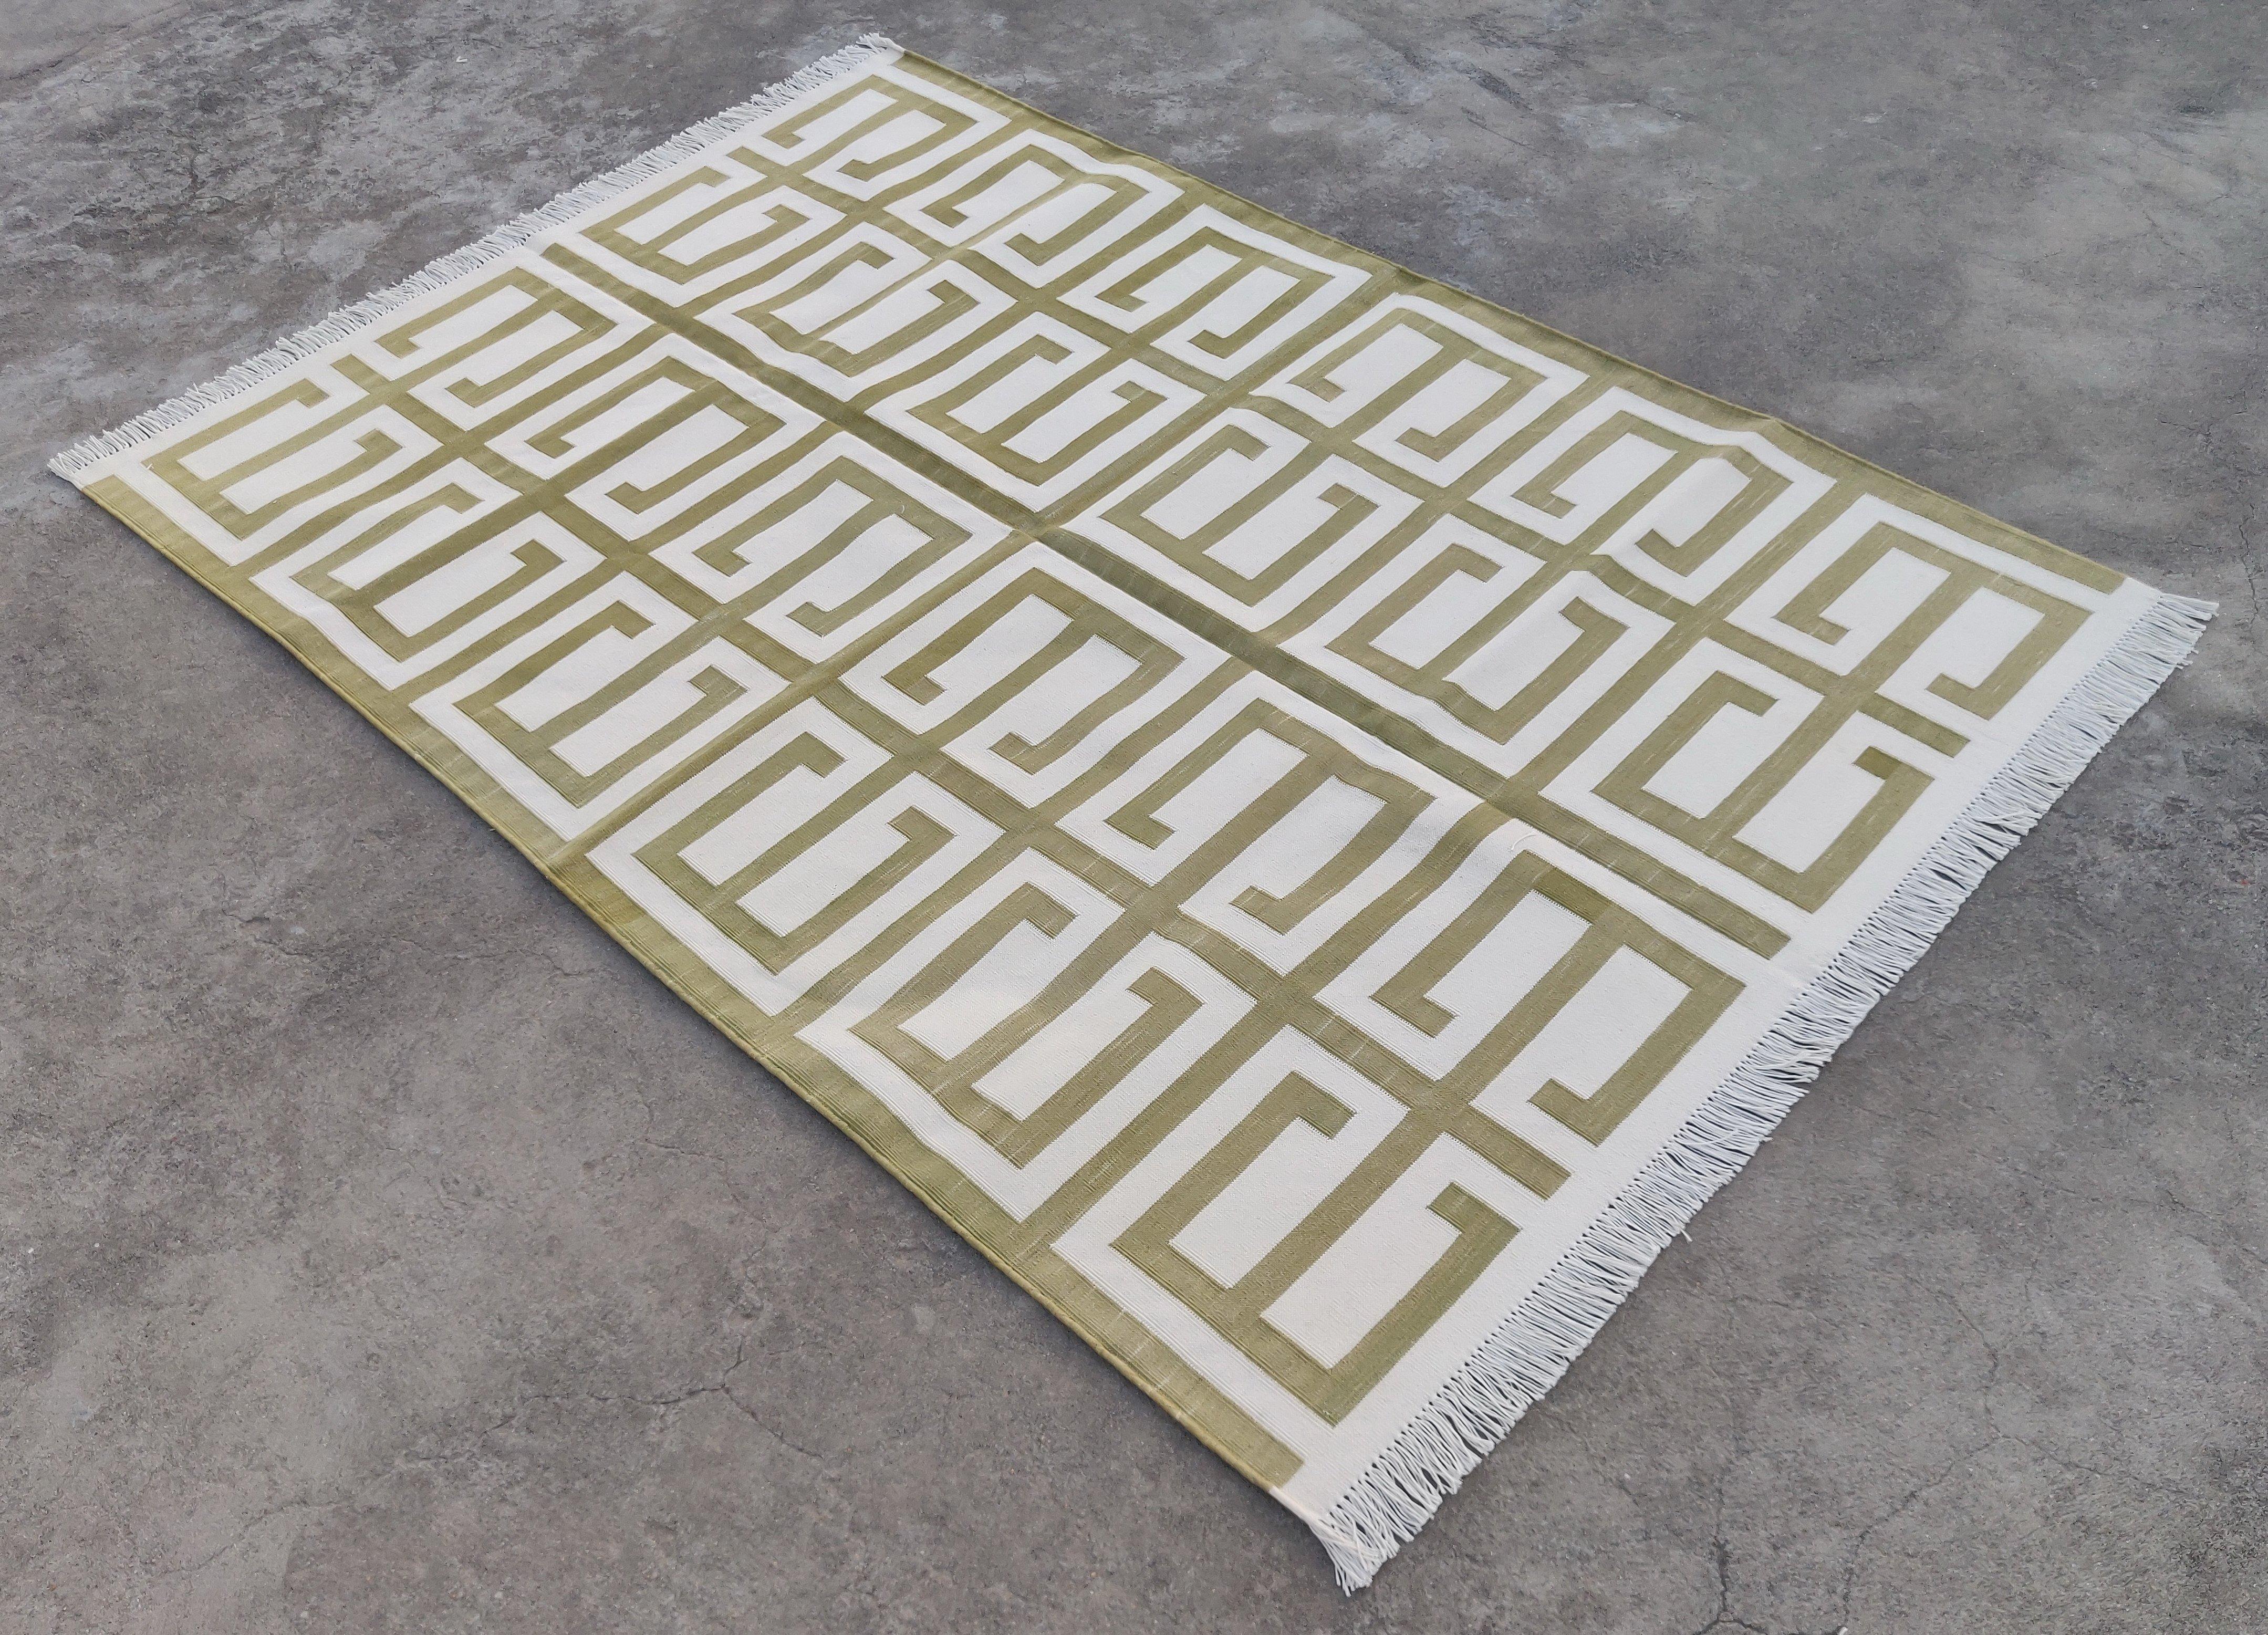 Cotton Vegetable Dyed Olive Green And White Geometric Indian Dhurrie Rug-4'x6' 

These special flat-weave dhurries are hand-woven with 15 ply 100% cotton yarn. Due to the special manufacturing techniques used to create our rugs, the size and color